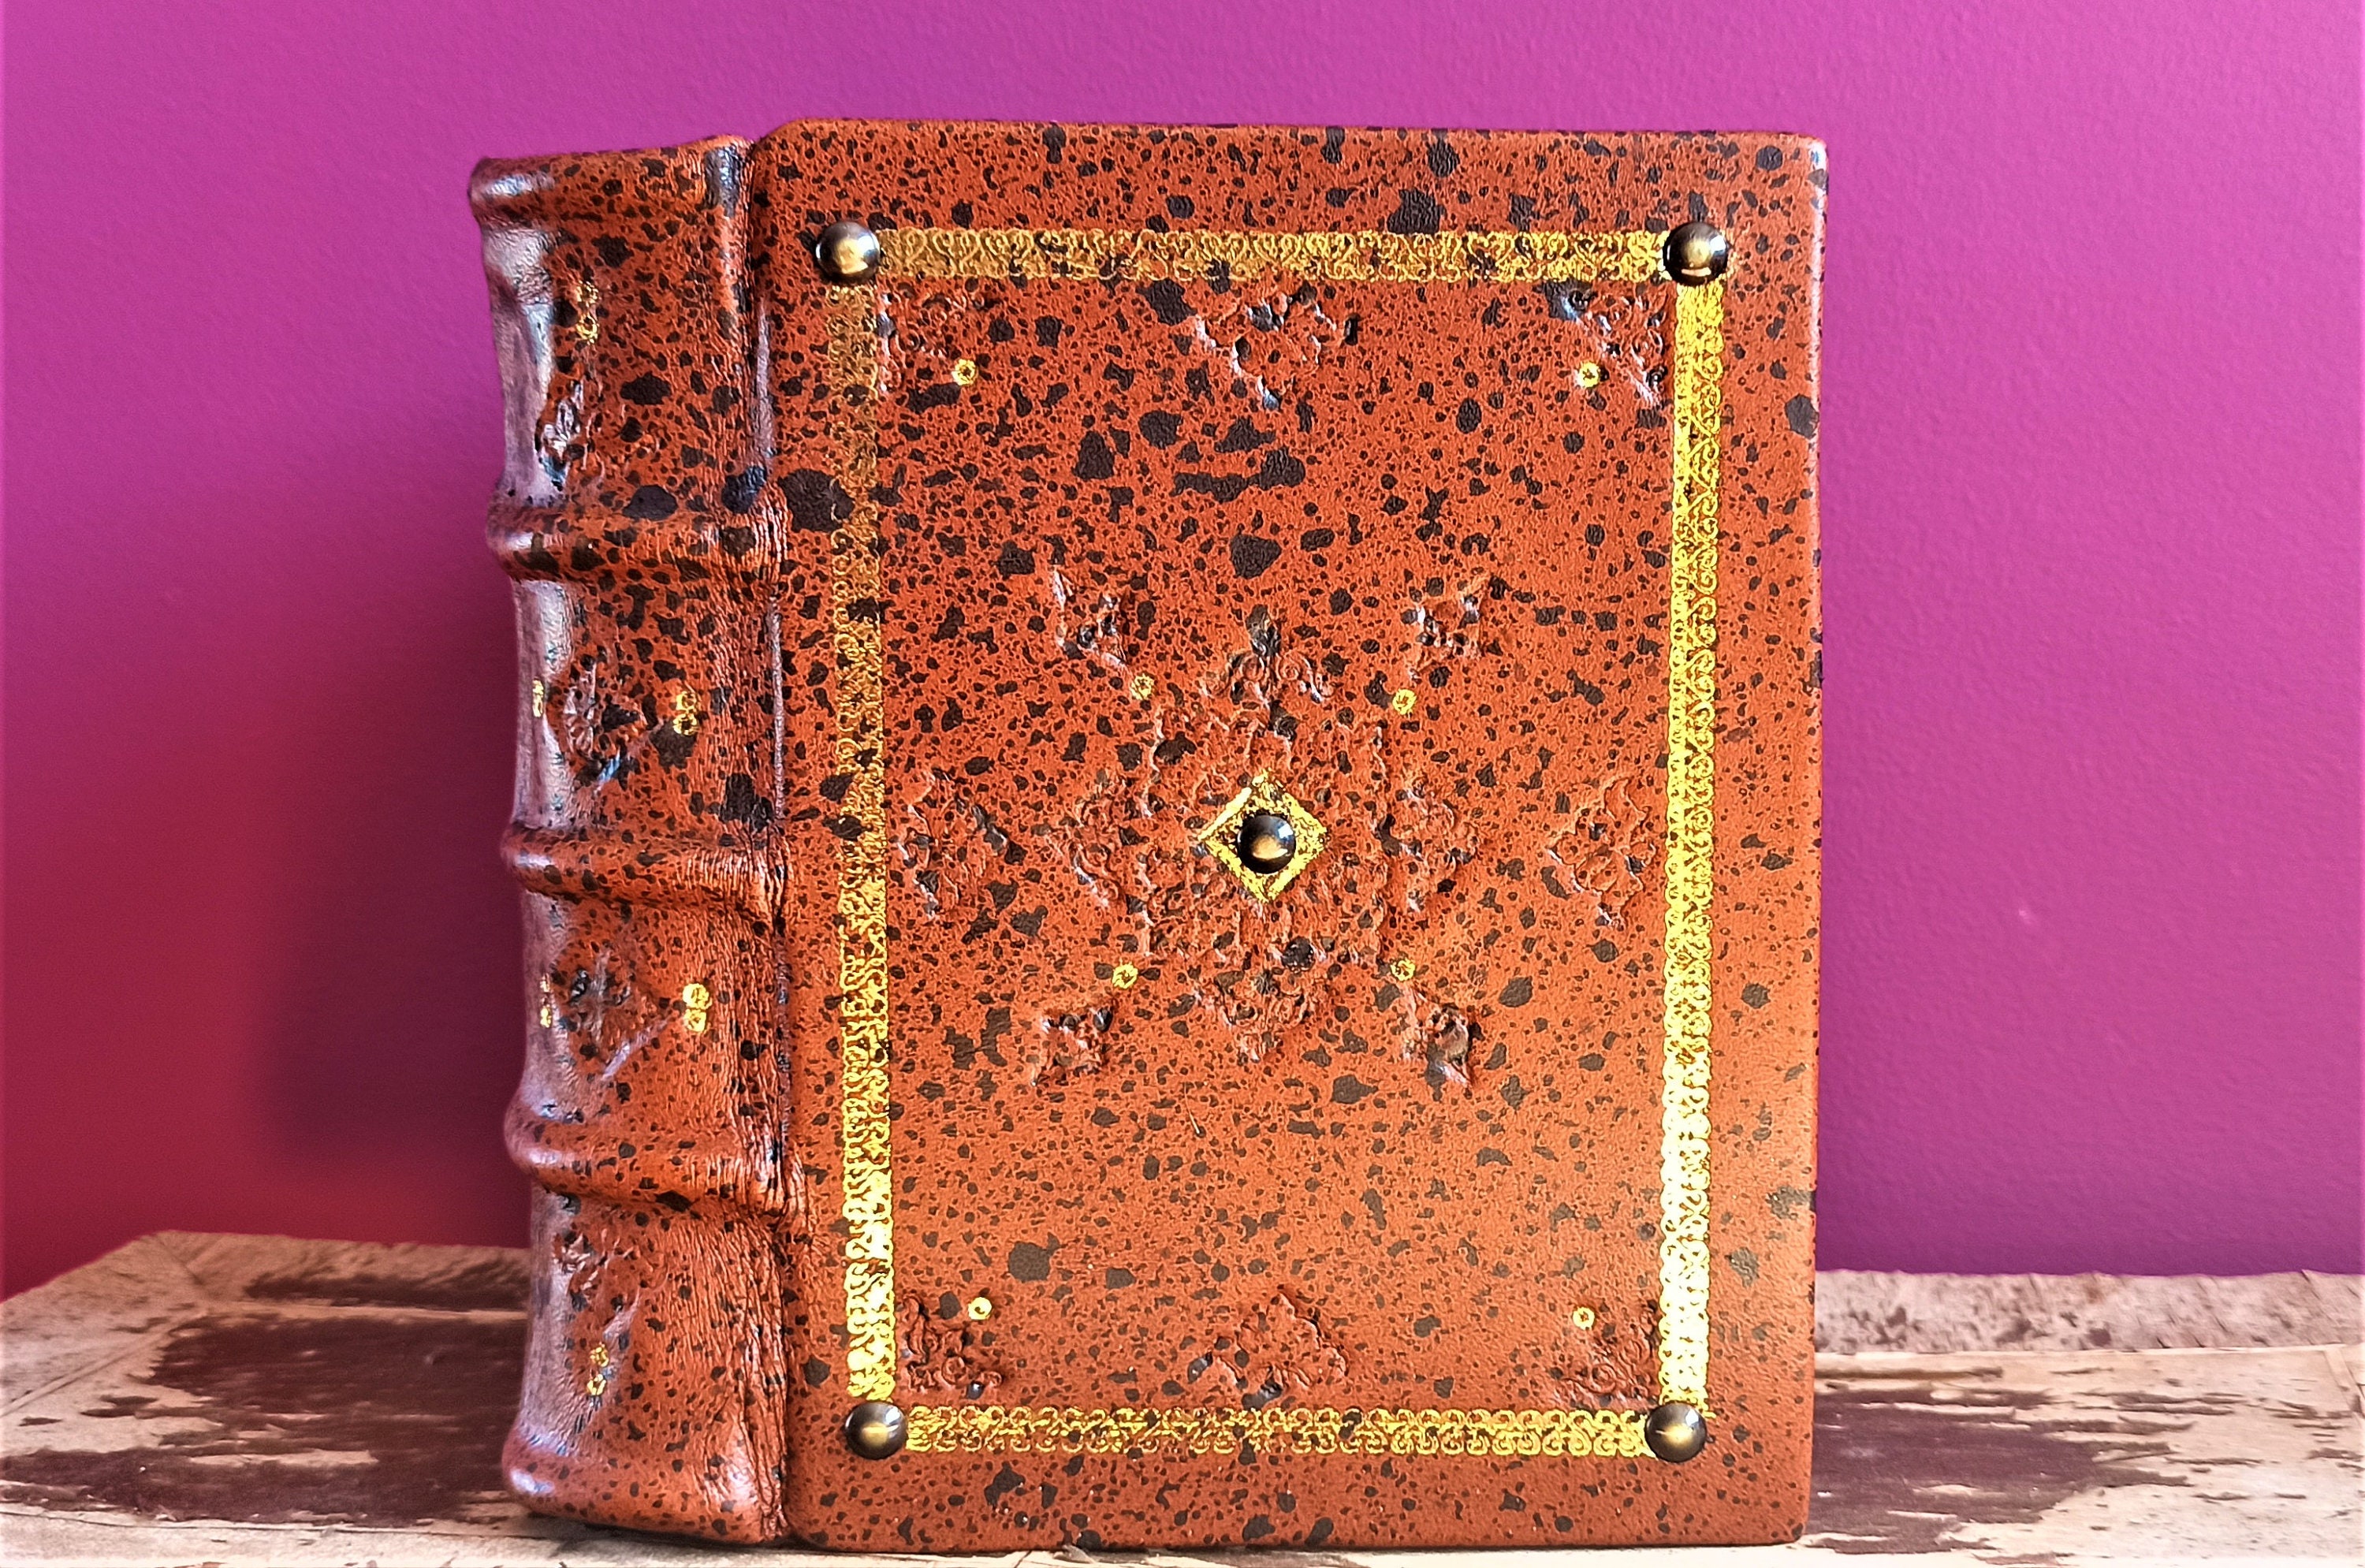 Dungeons and Dragons - Curse of Strahd Leatherbound Tome - Geekify Inc